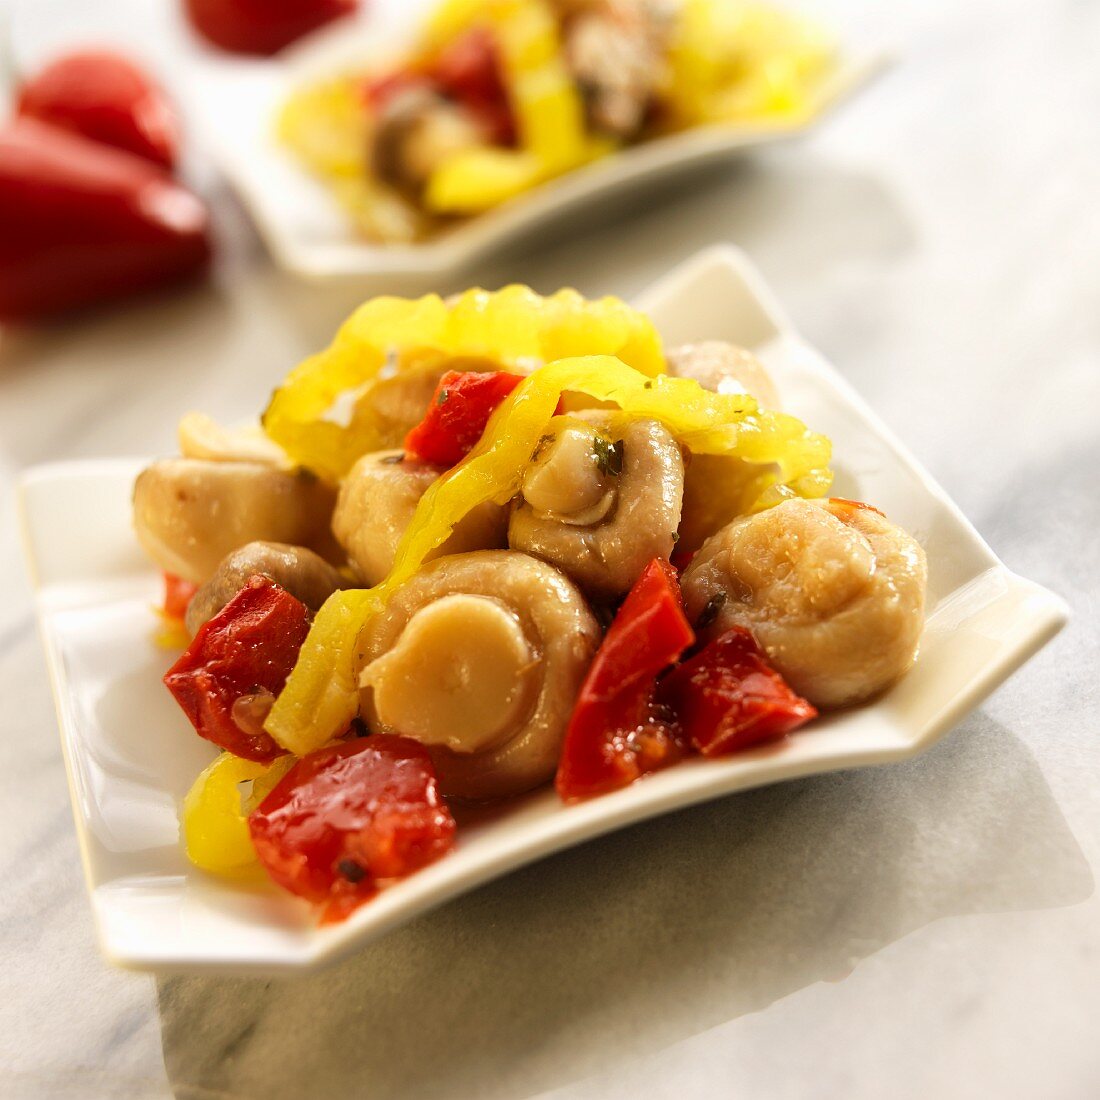 Marinated mushrooms with red and yellow peppers (Spain)